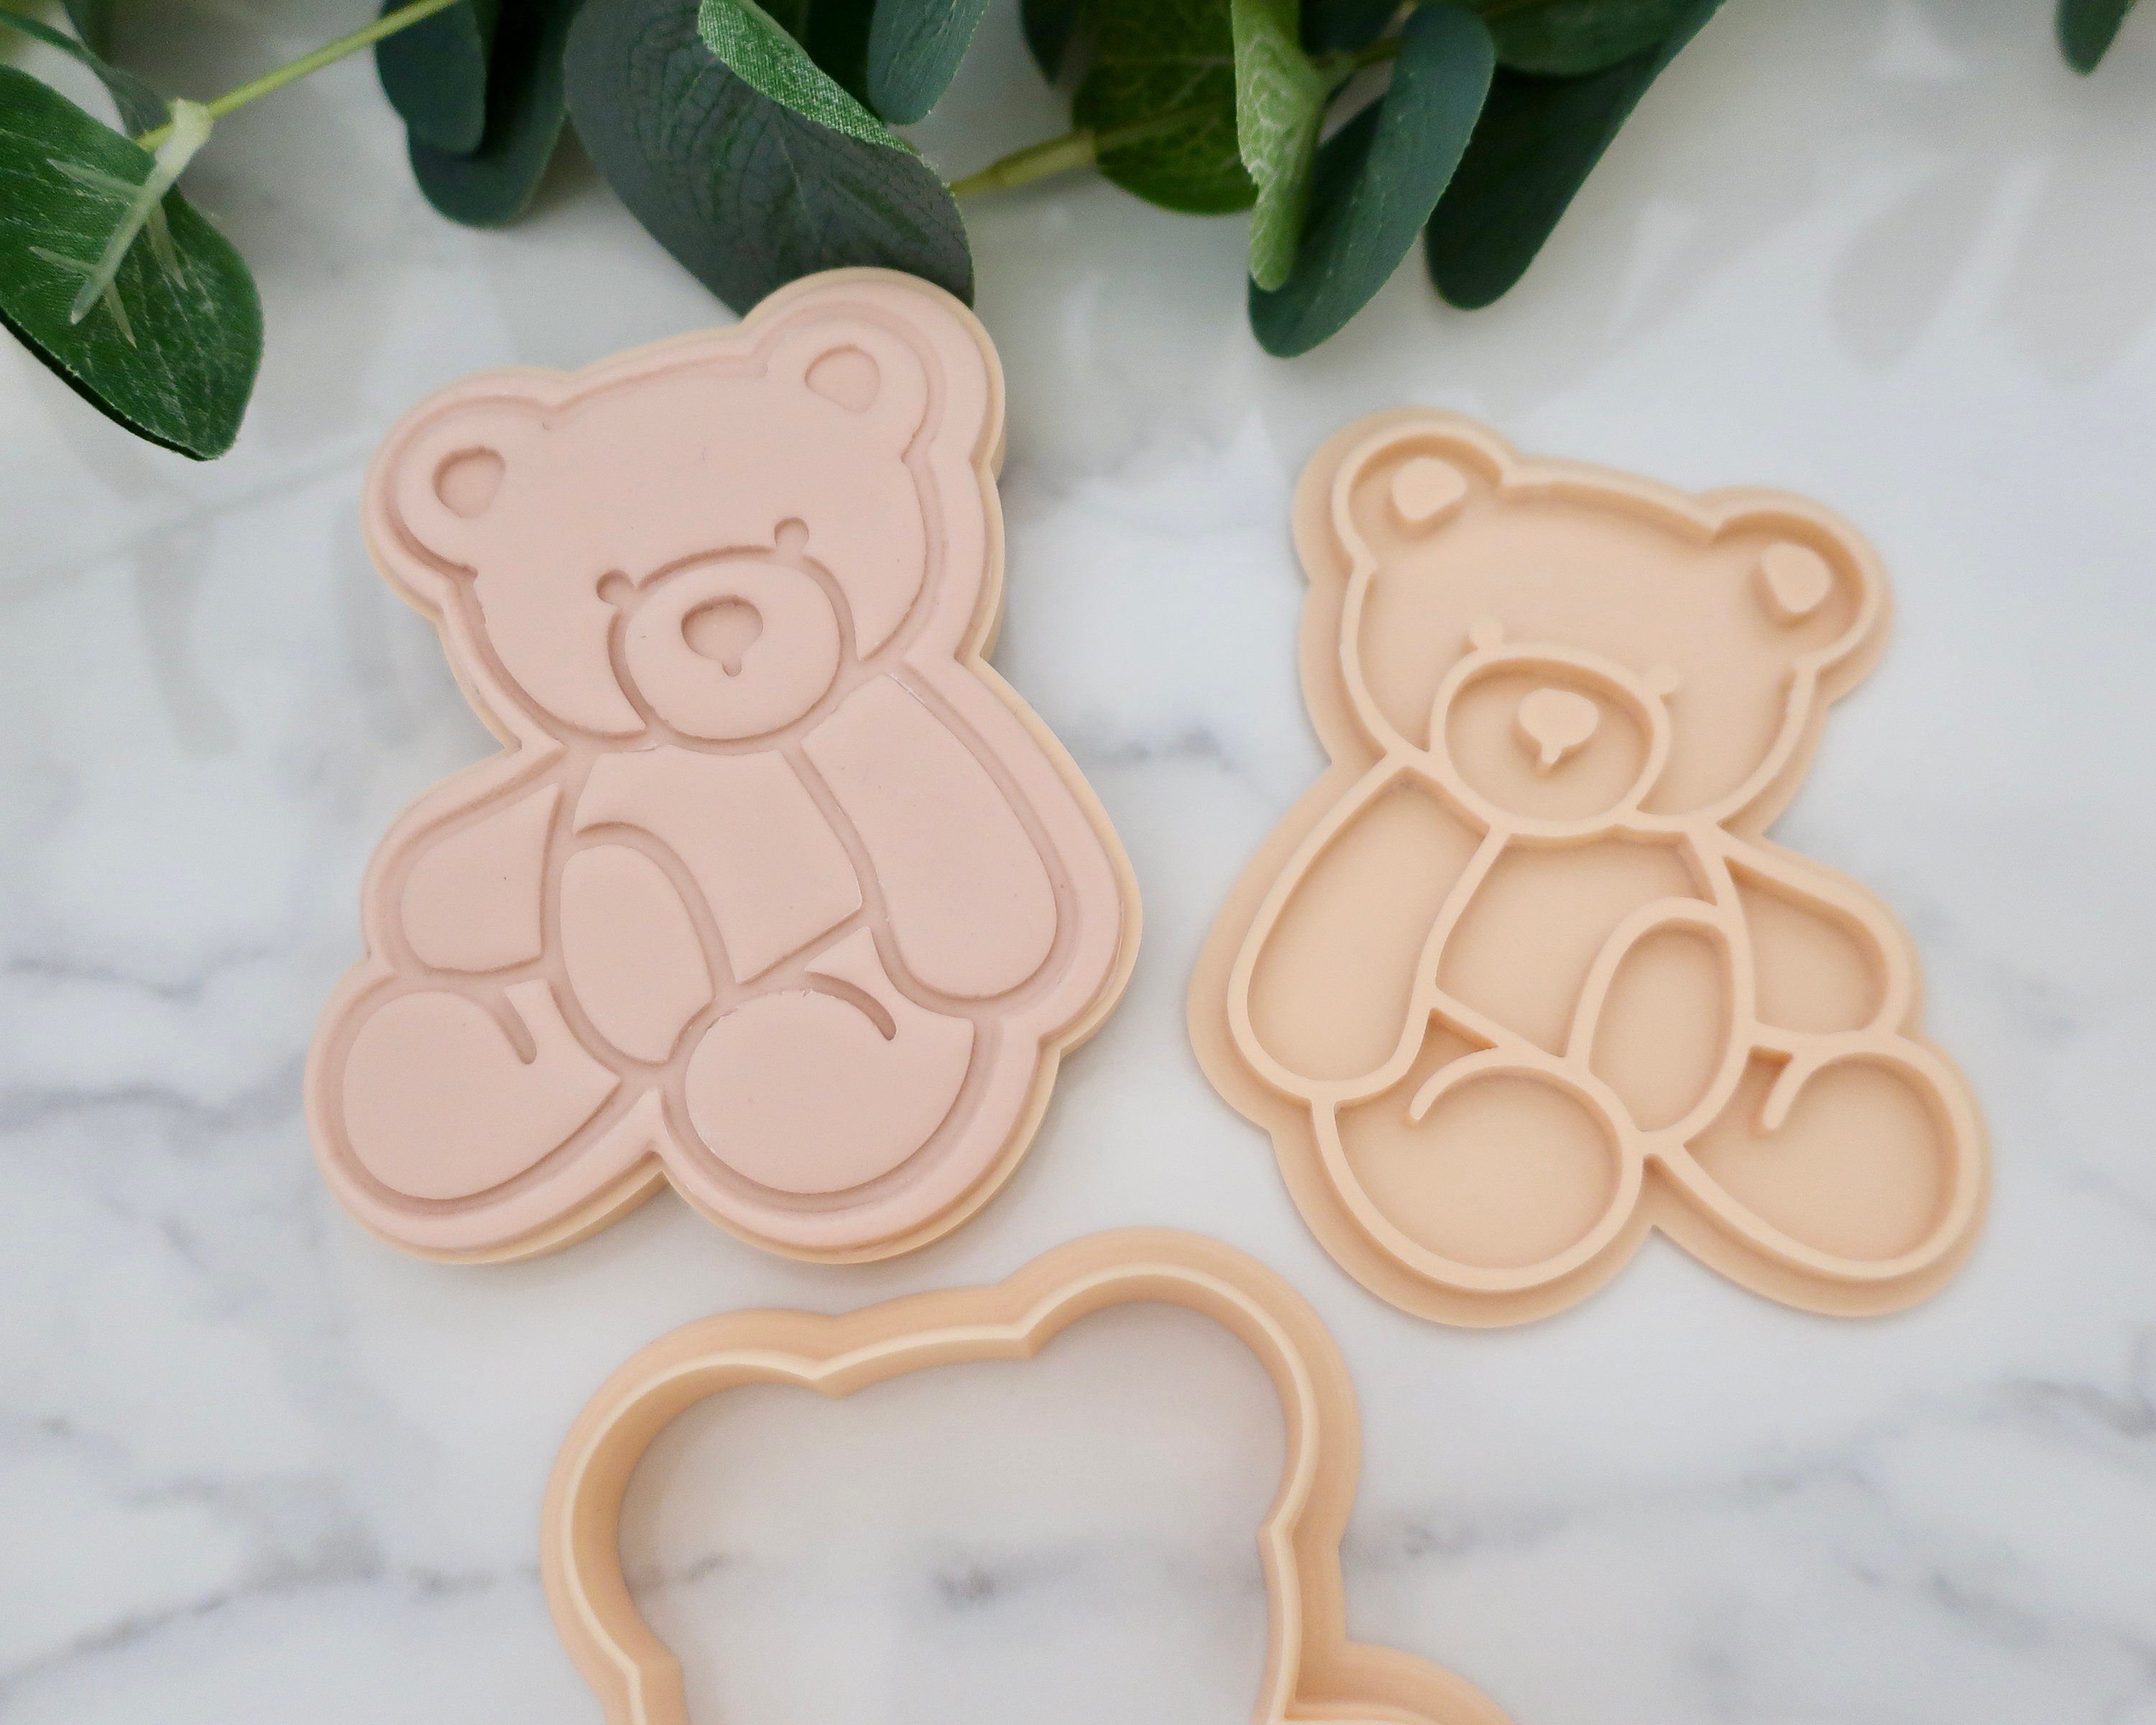 Large Teddy Bear Cookie Cutter - Handcrafted by The Fussy Pup